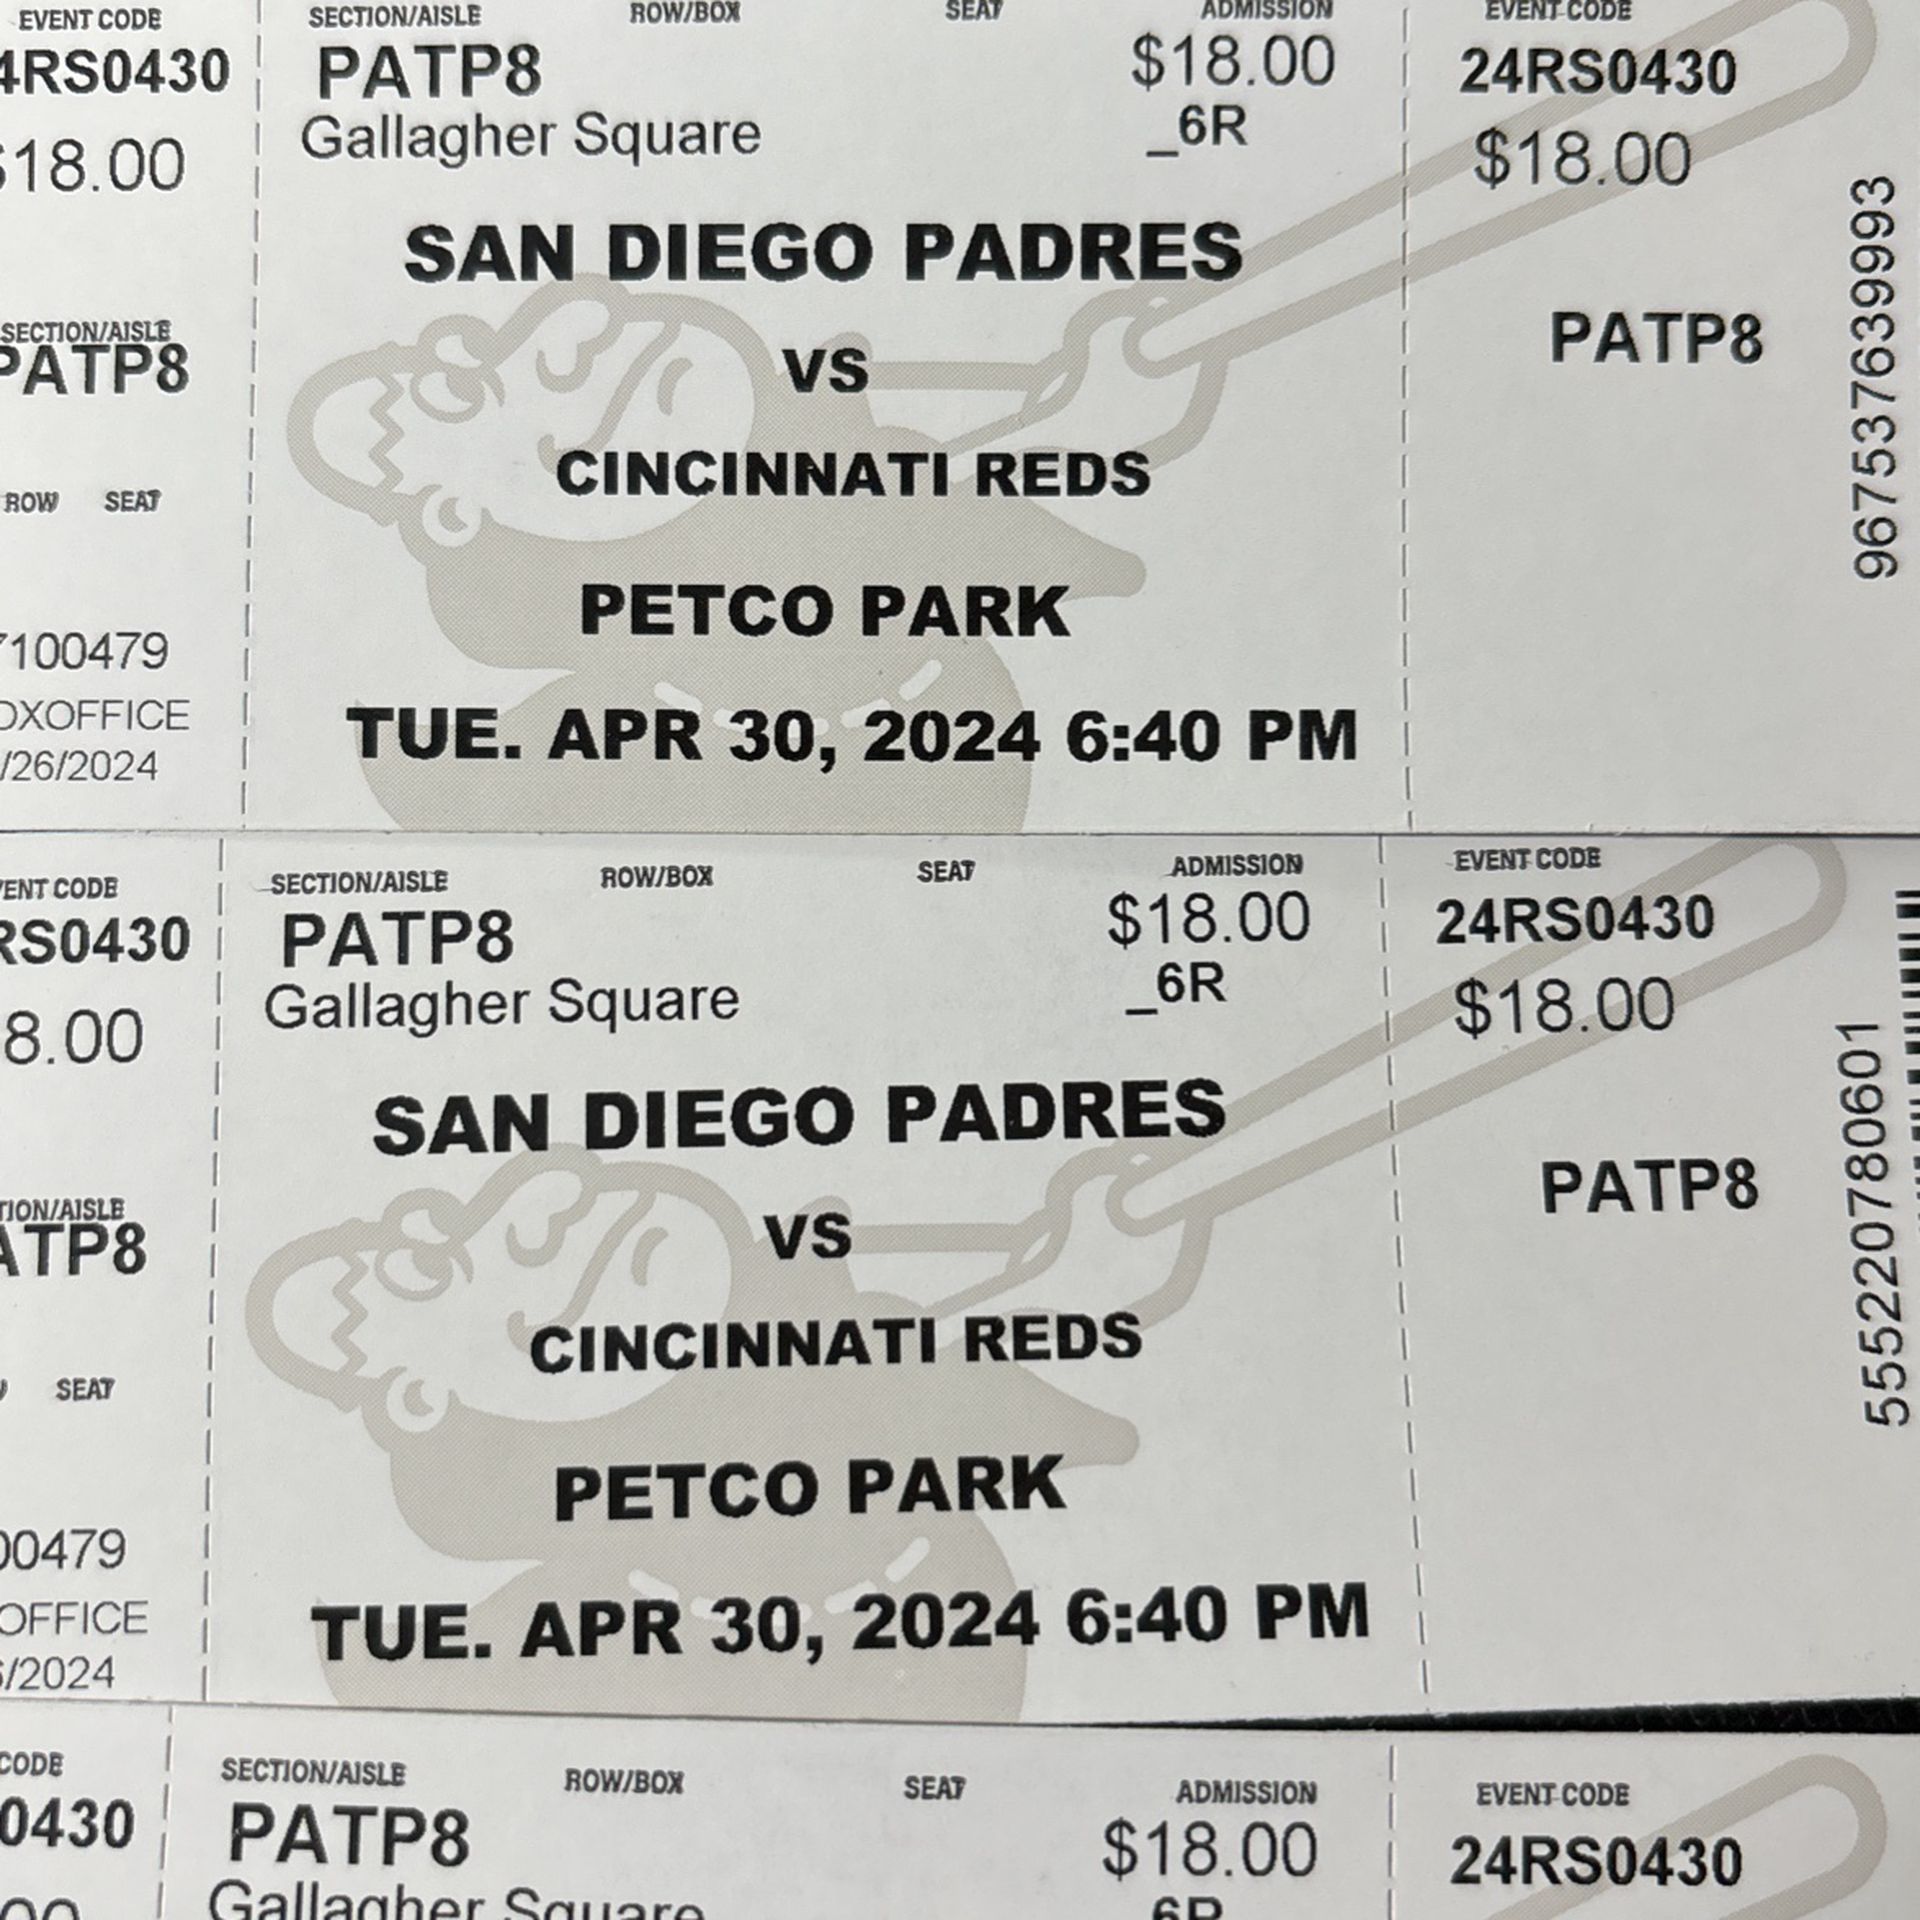 Padres vs. Reds Tuesday 4/30 - 4 Tickets 